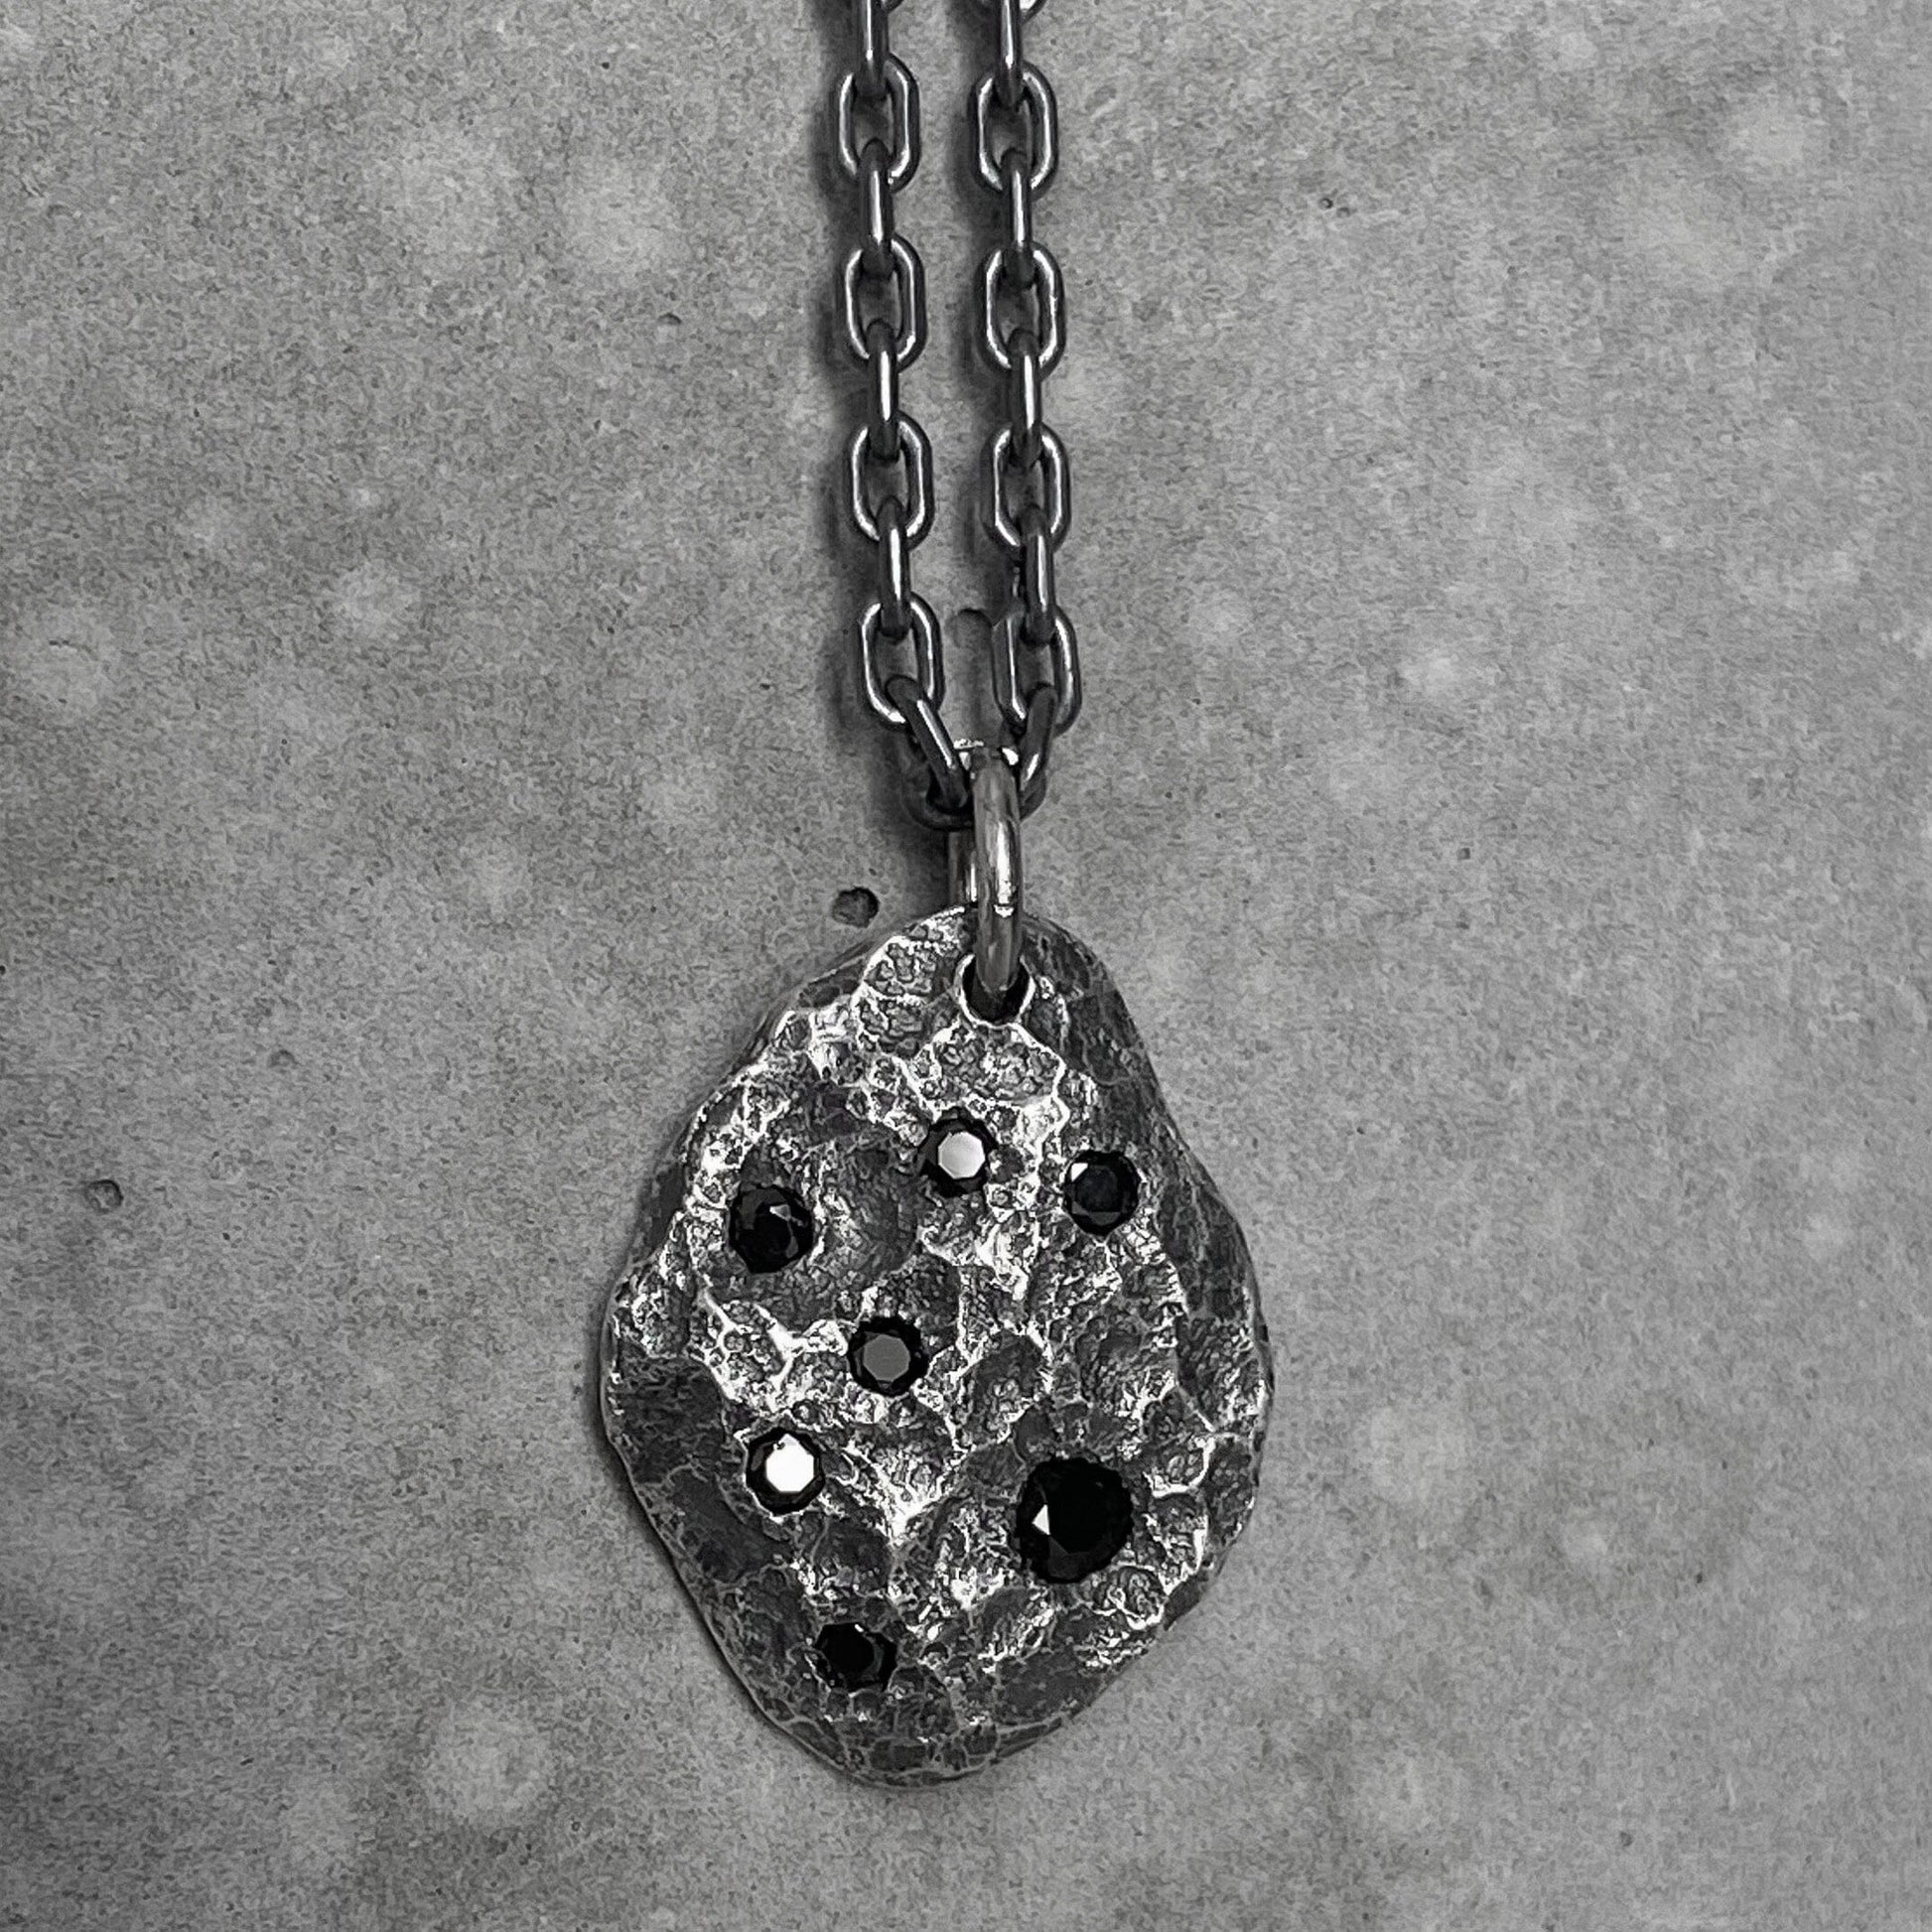 Meteor pendant with seven black diamonds and chain Charms & Pendants Project50g no Black 70cm